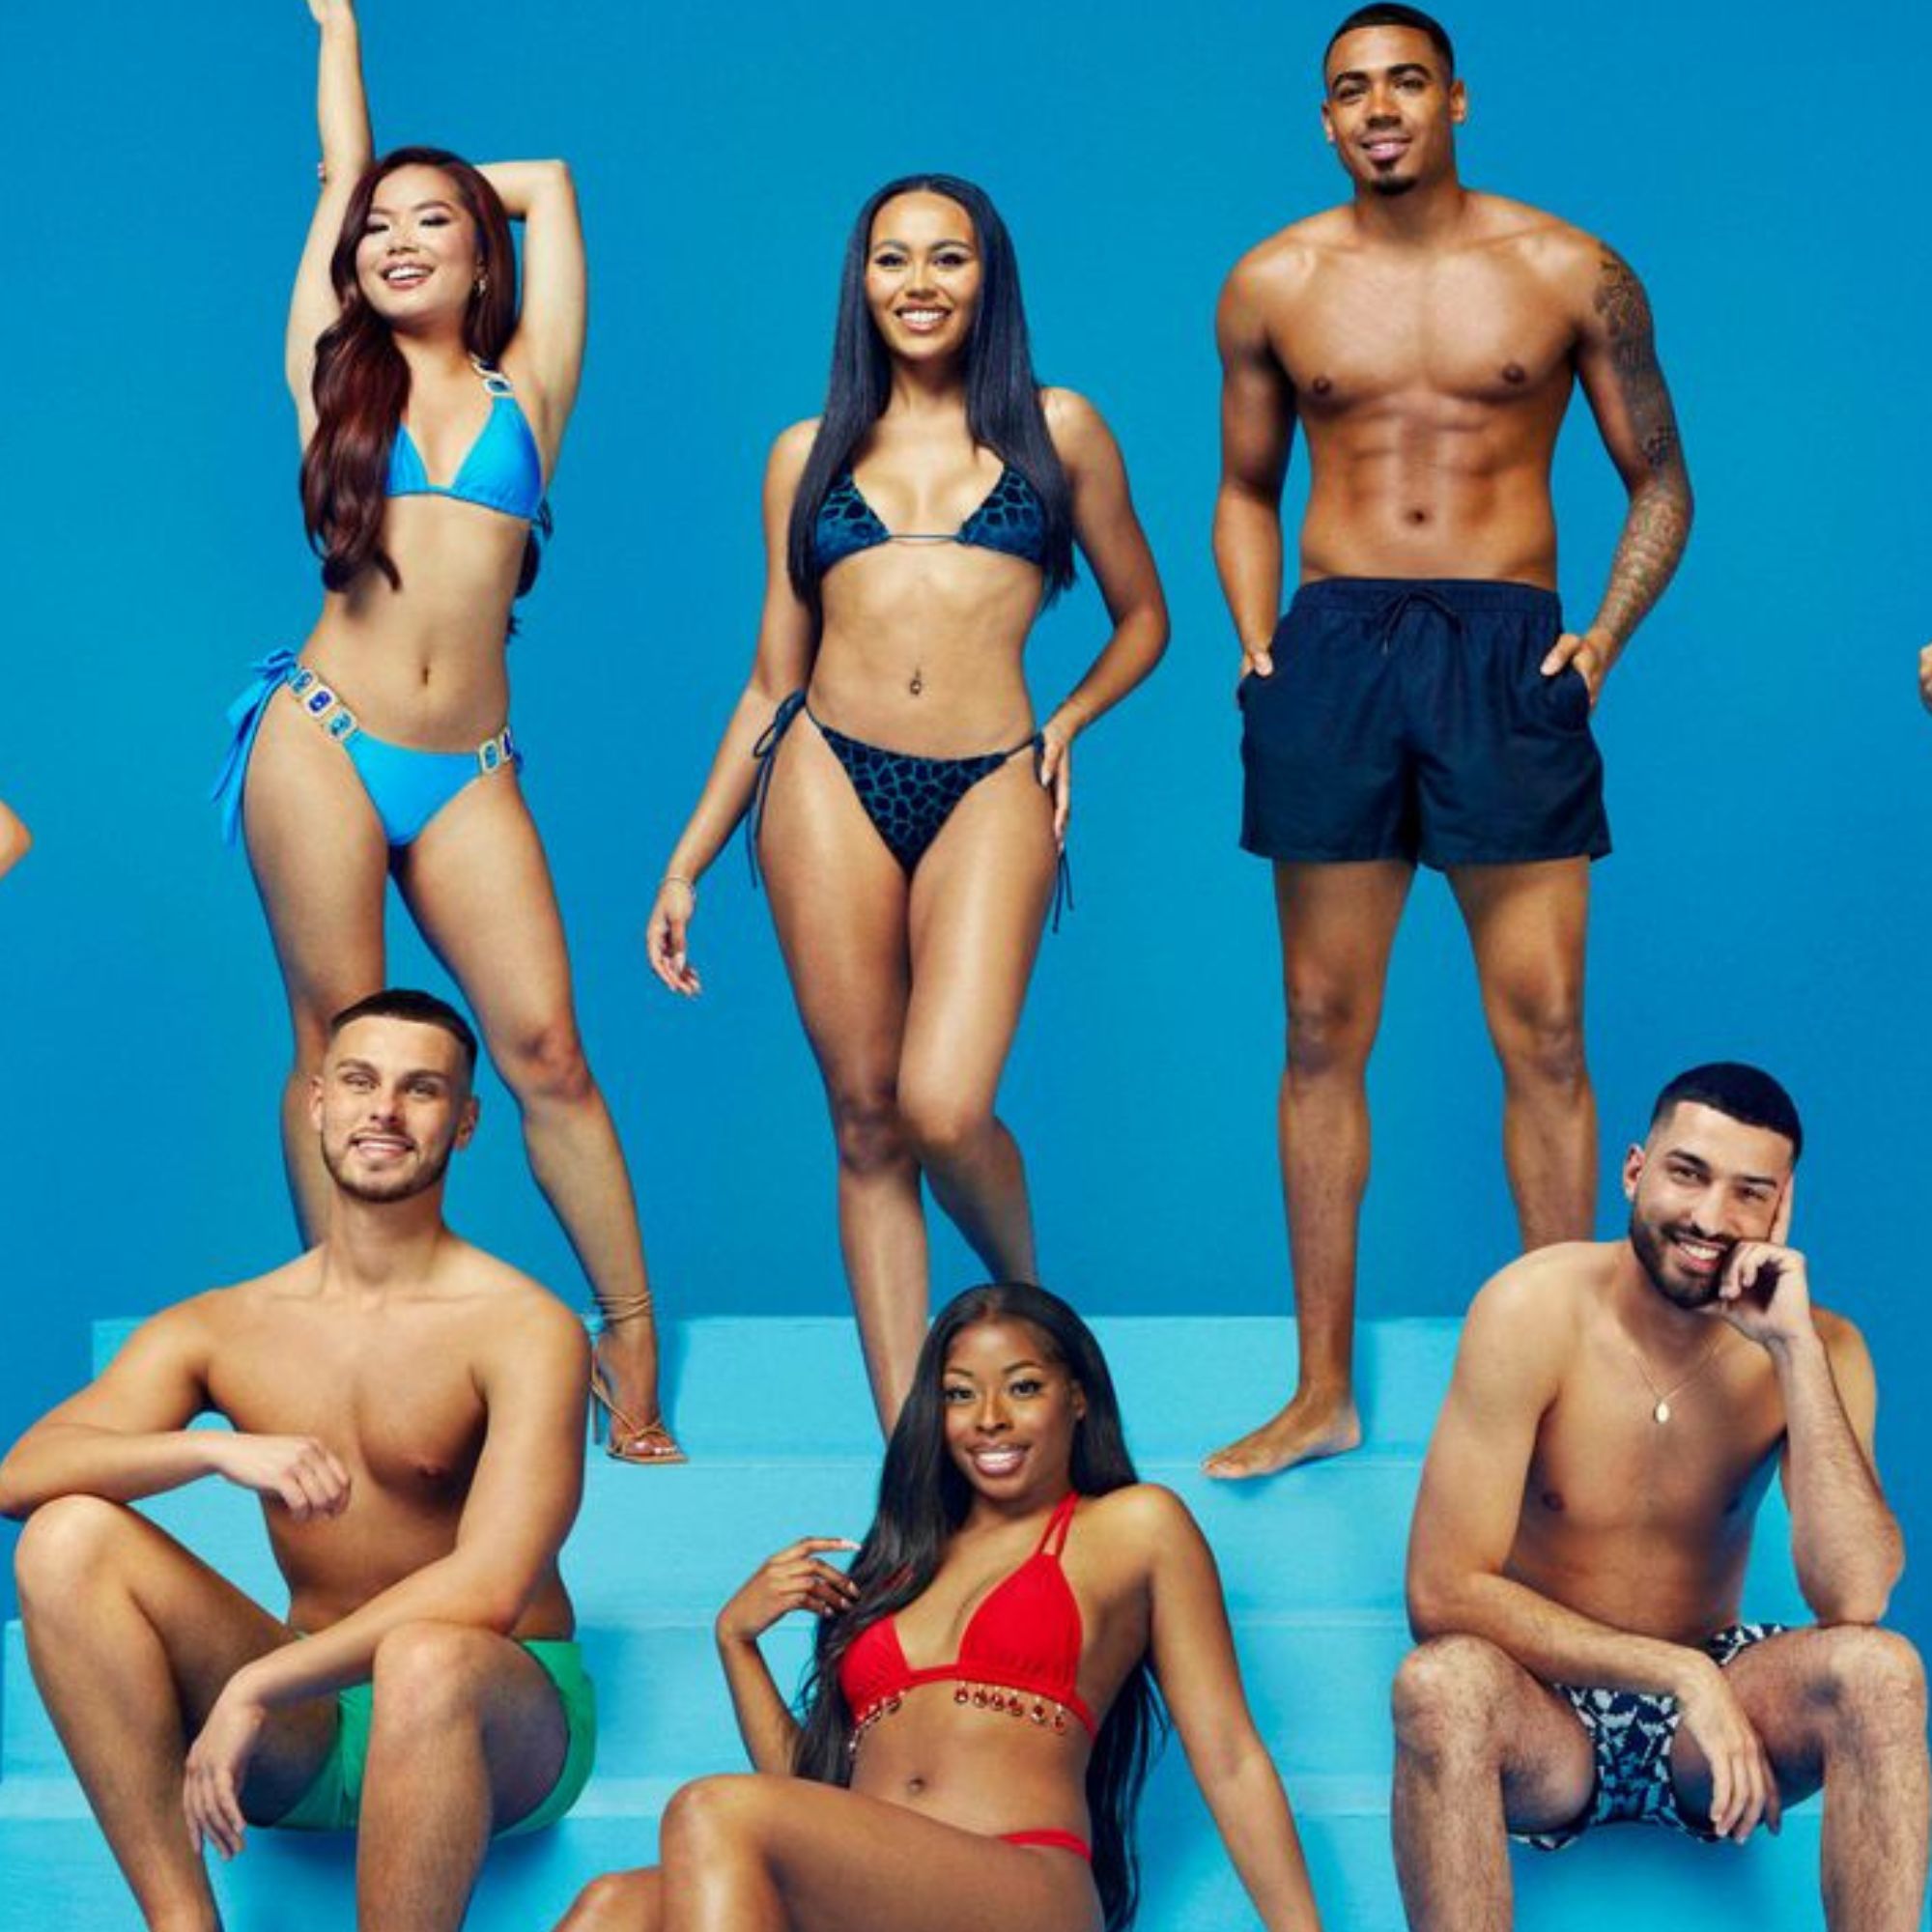 Everything You Need to Know About "Love Island UK" Season 10